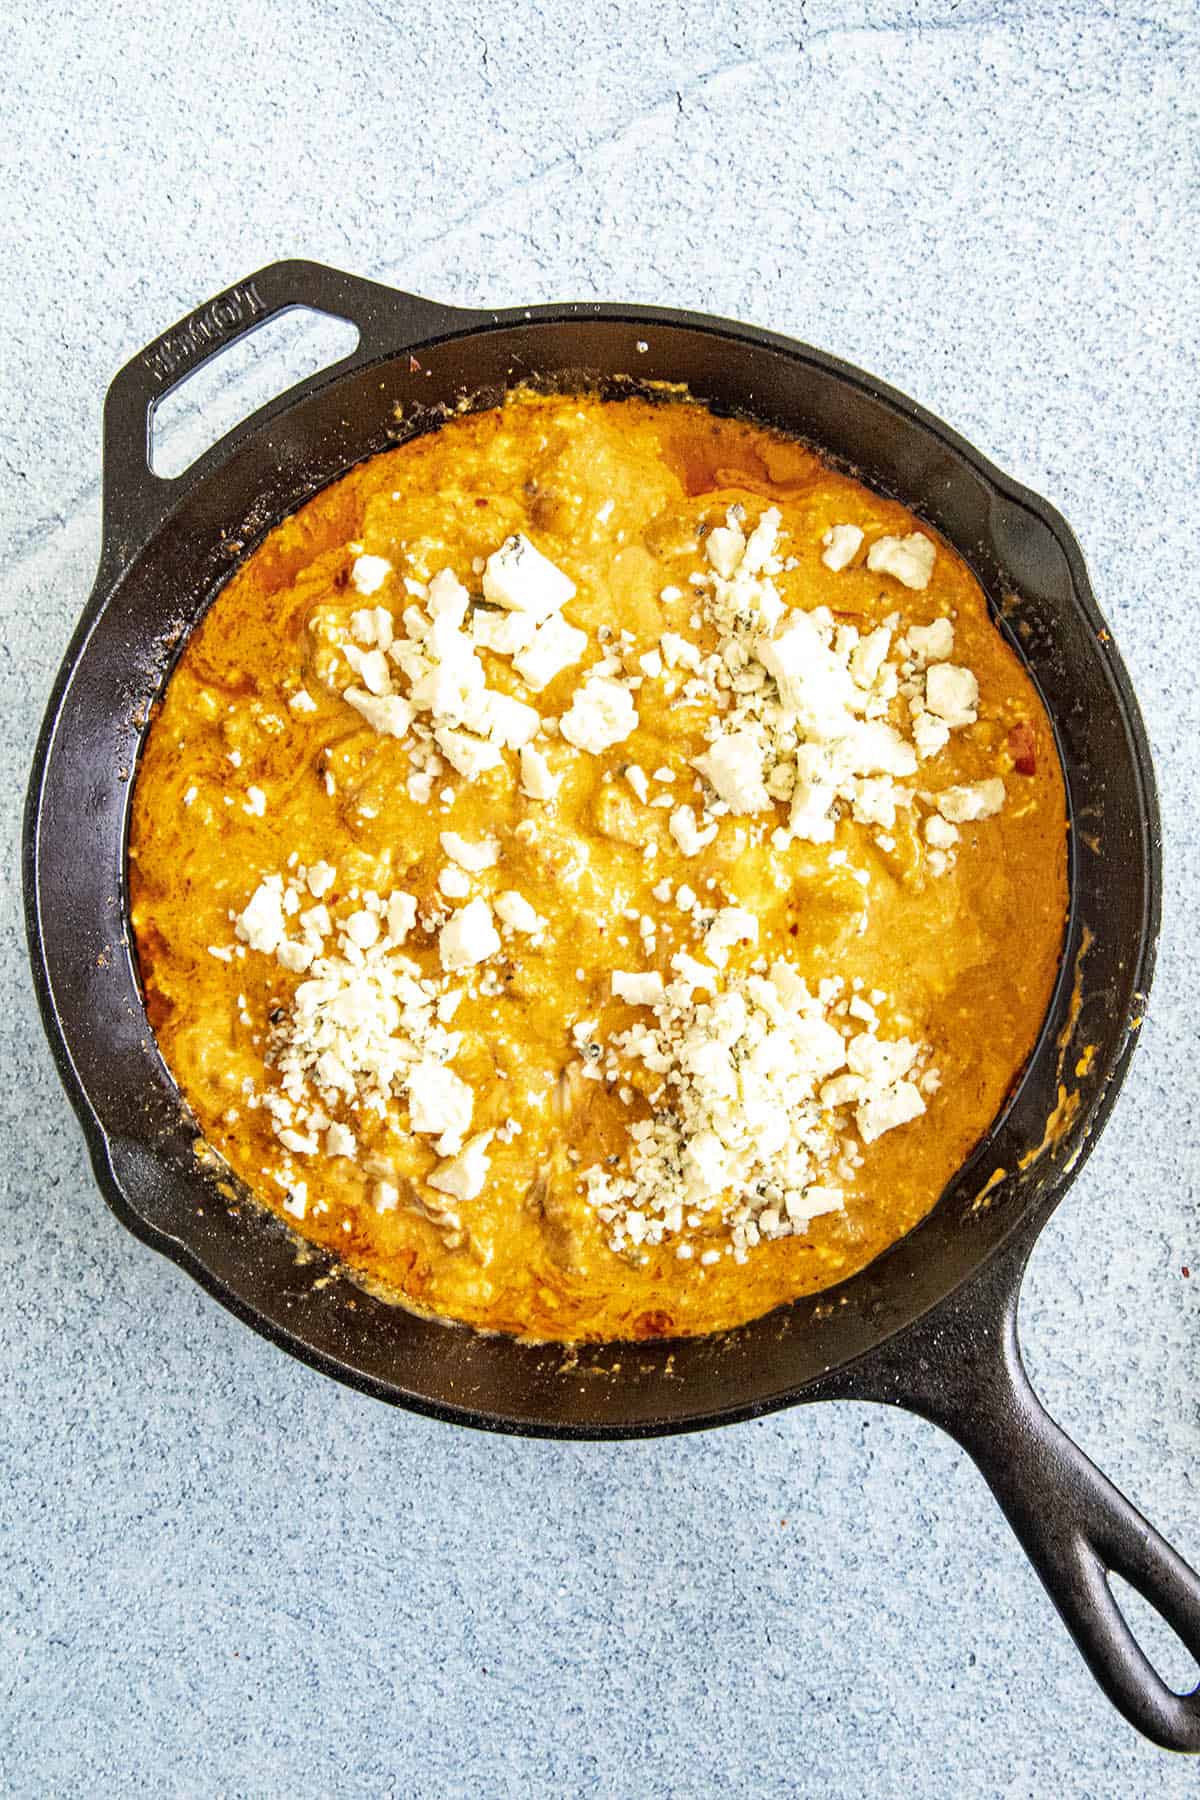 Buffalo Chicken Dip ingredients mixed in a pan, ready to bake